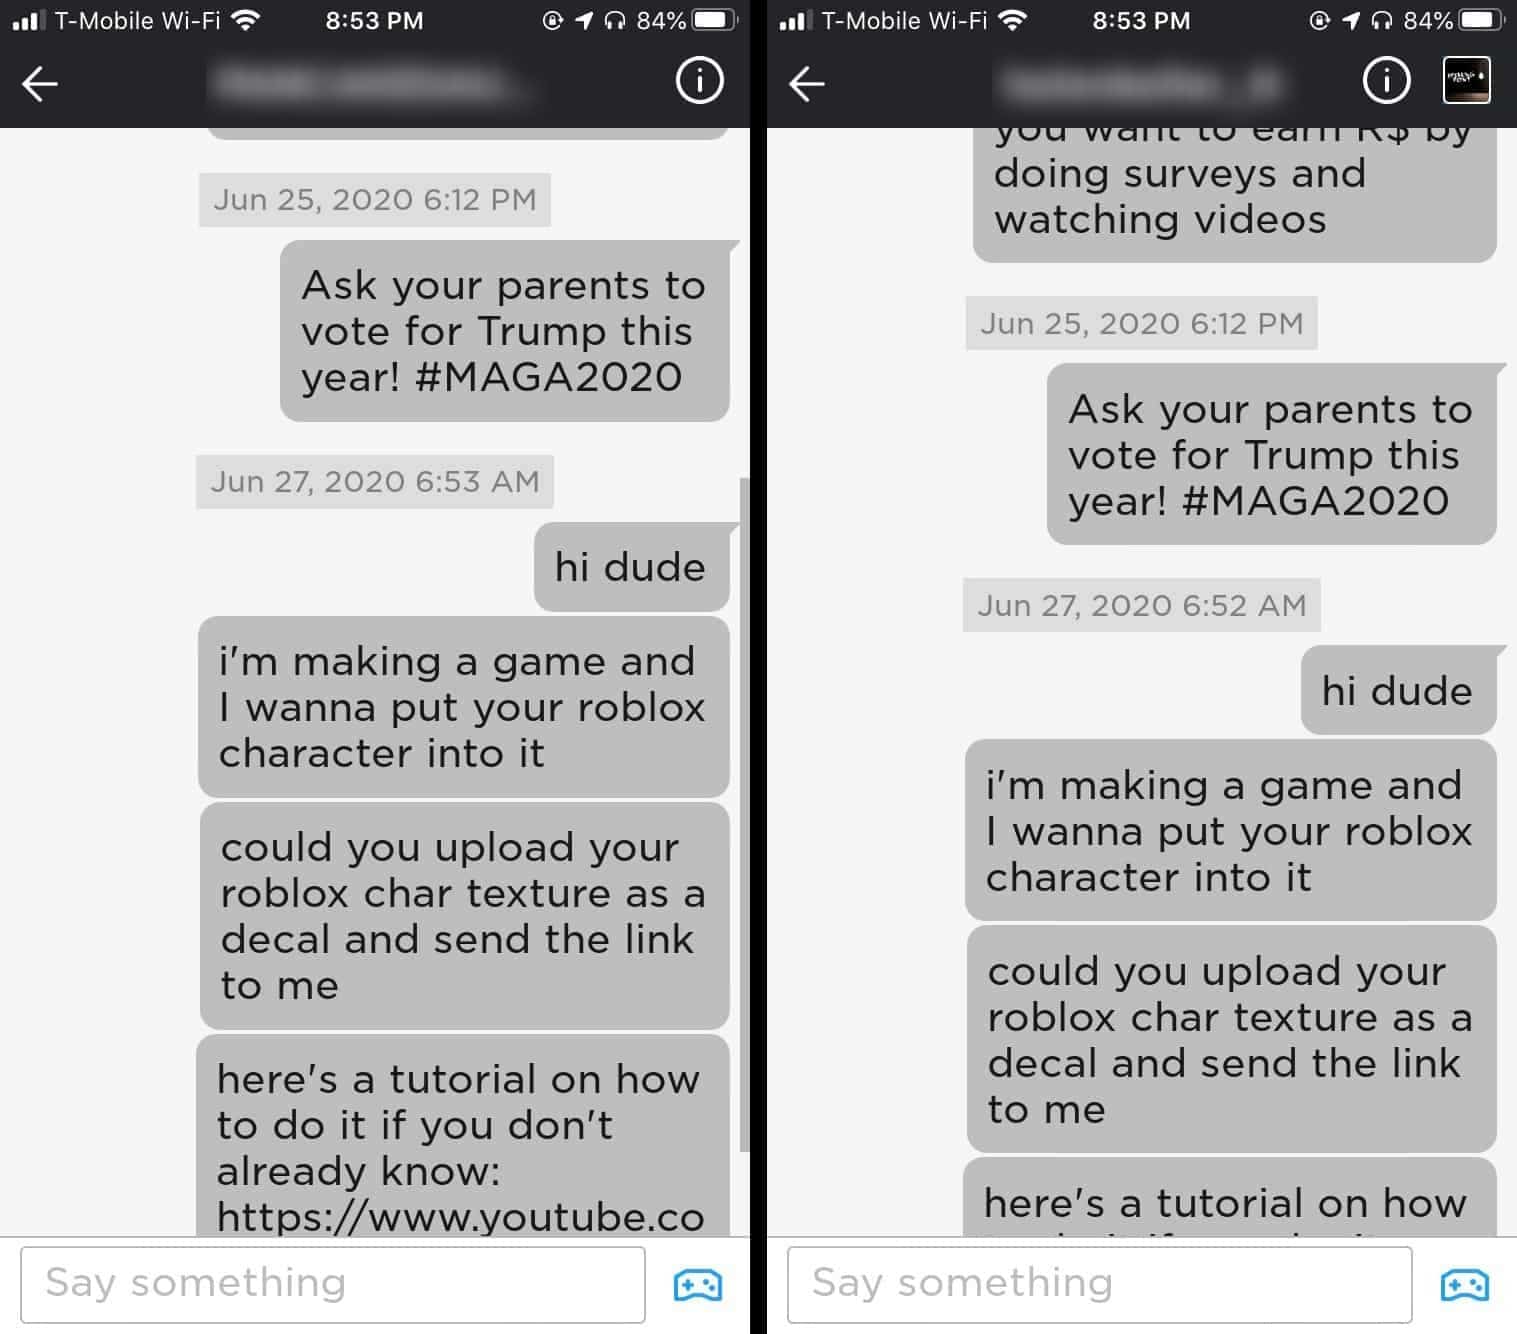 Hackers Deface Roblox Accounts With Pro Trump Messages - roblox hacker group